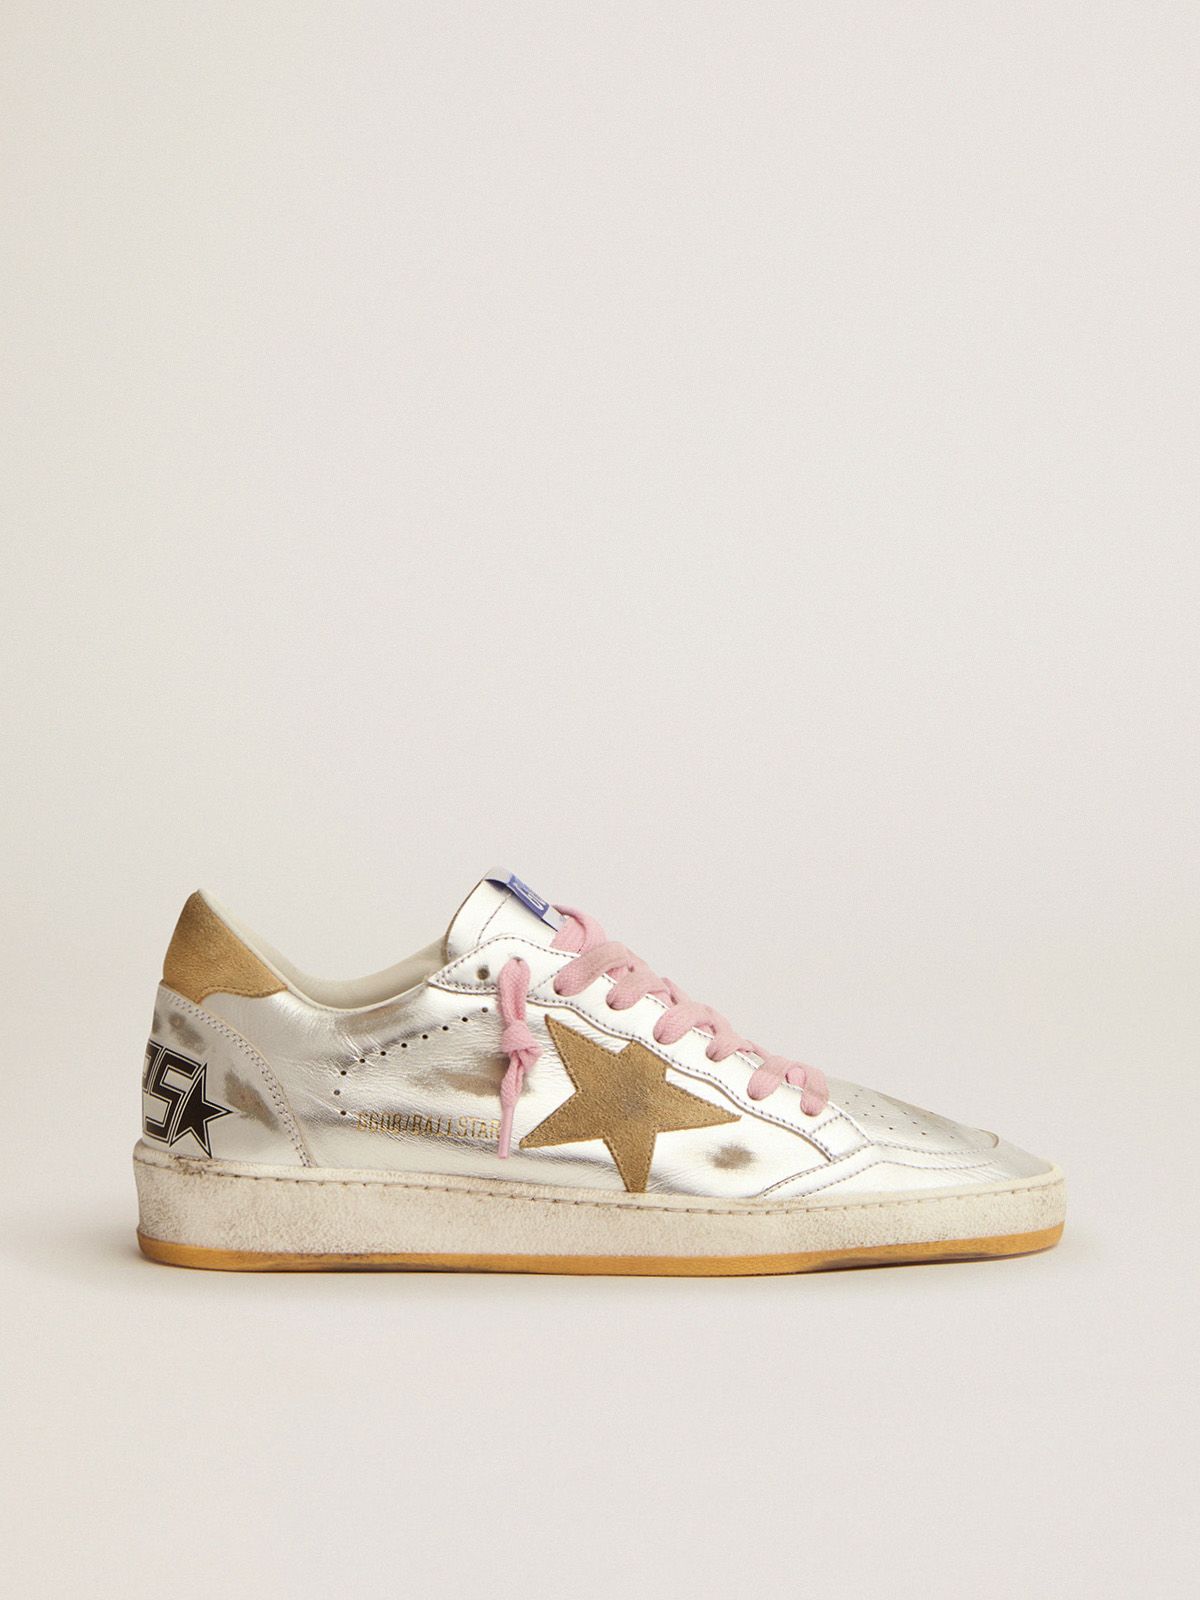 golden goose laminated silver with Ball leather sneakers Star details in sand-colored suede LTD